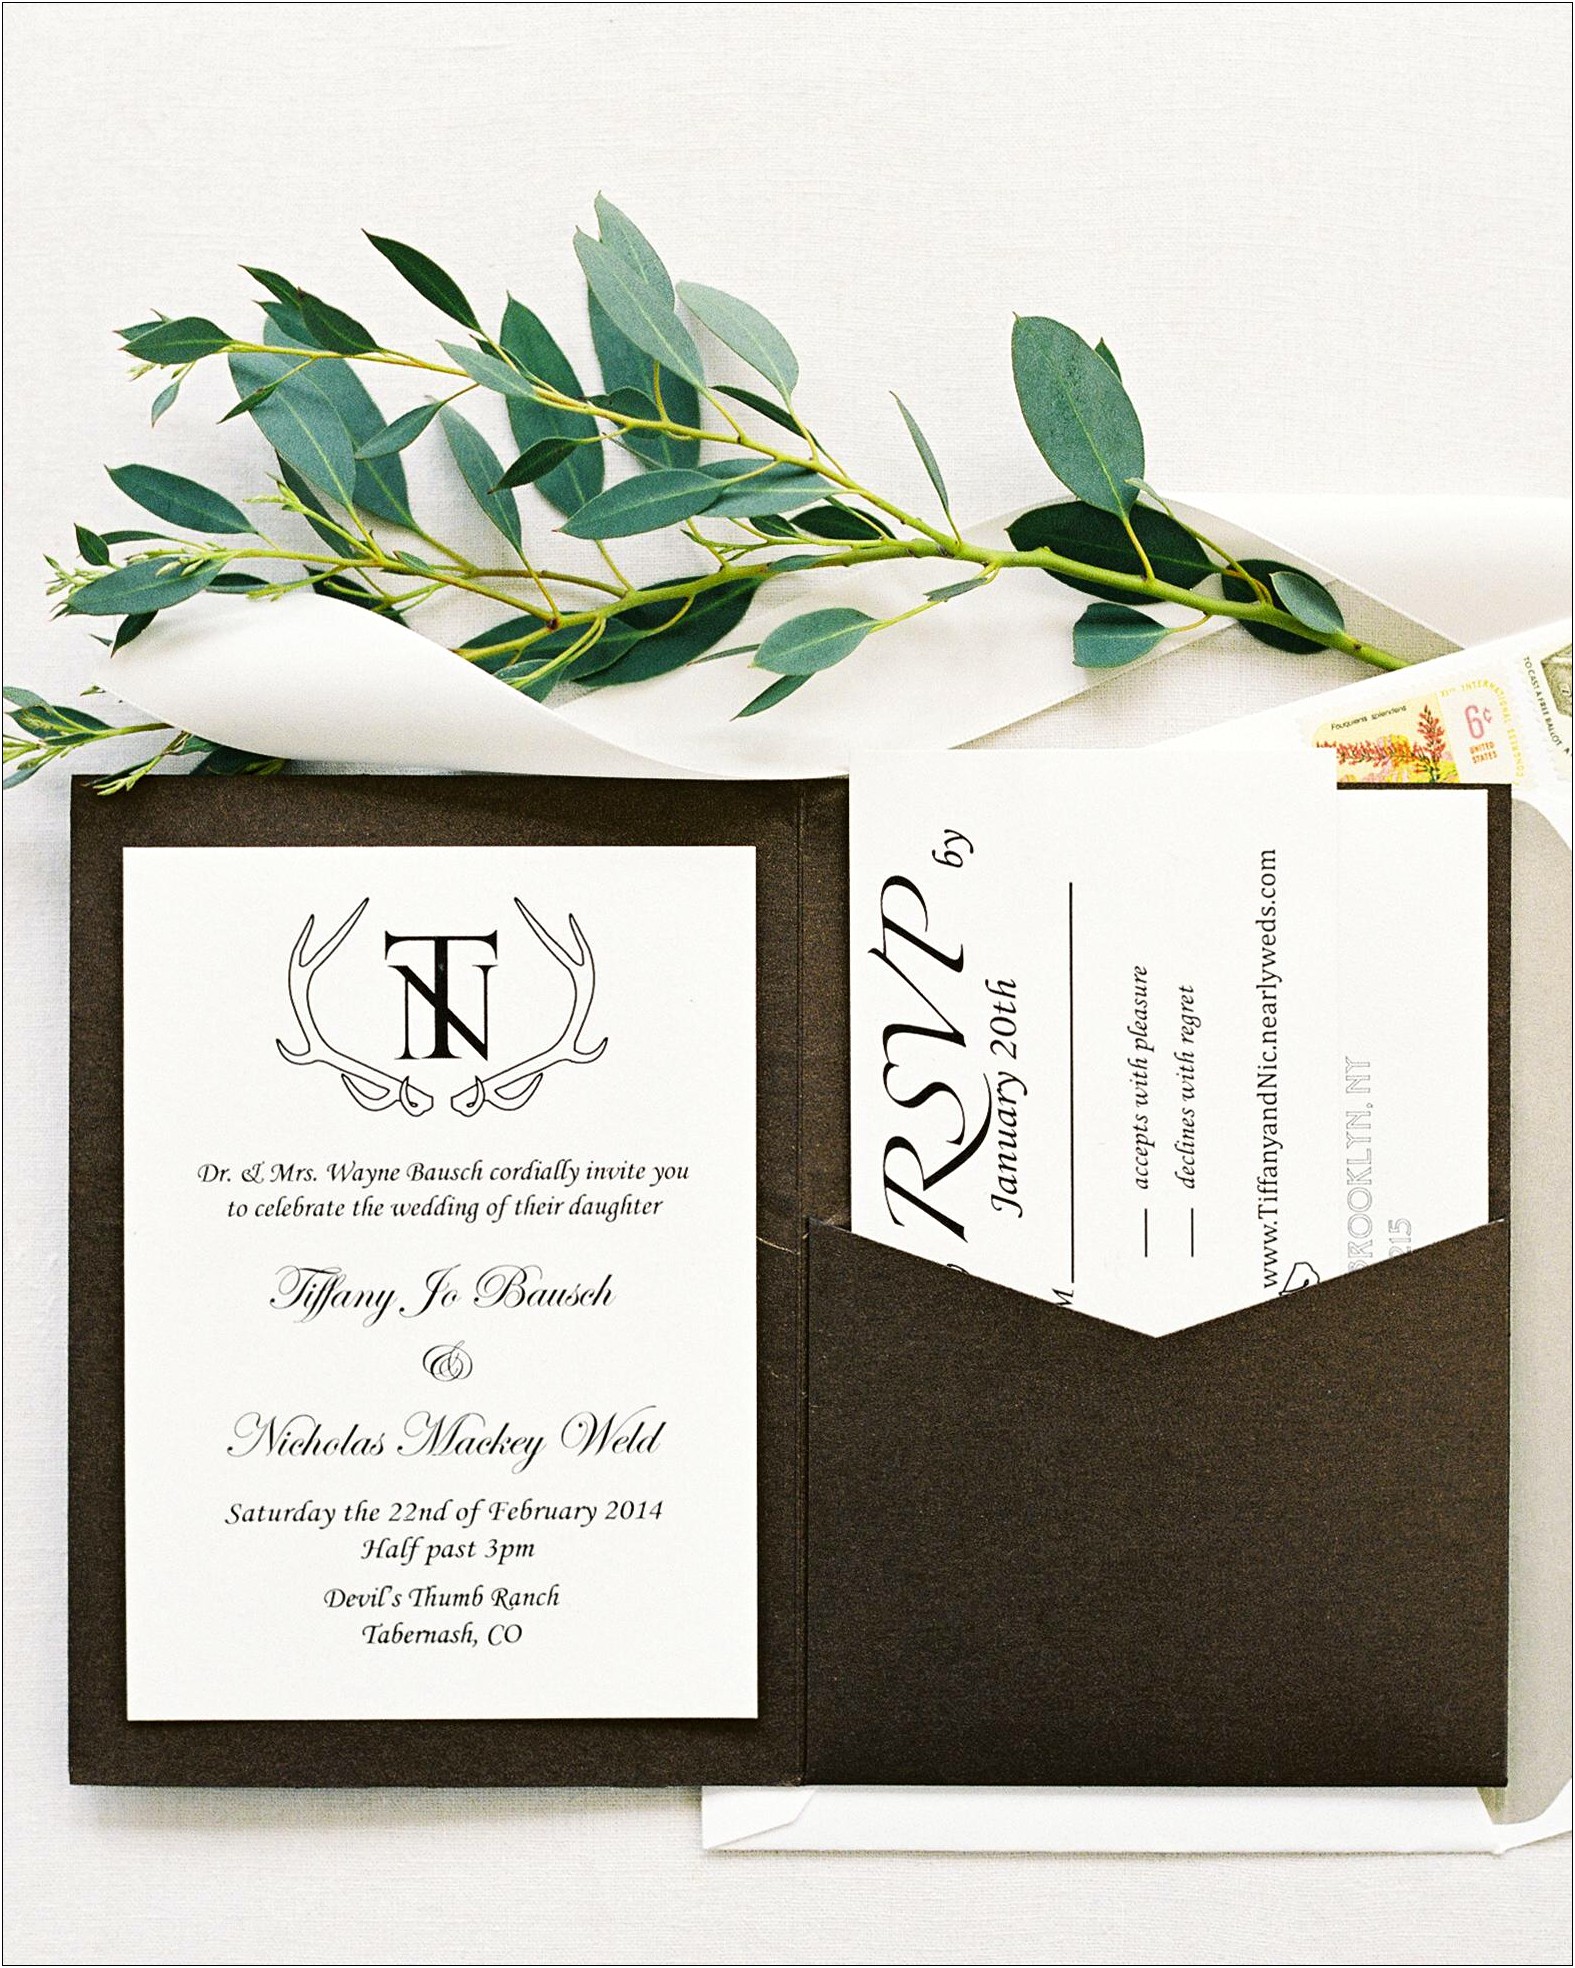 Best Type Of Printing For Wedding Invitations